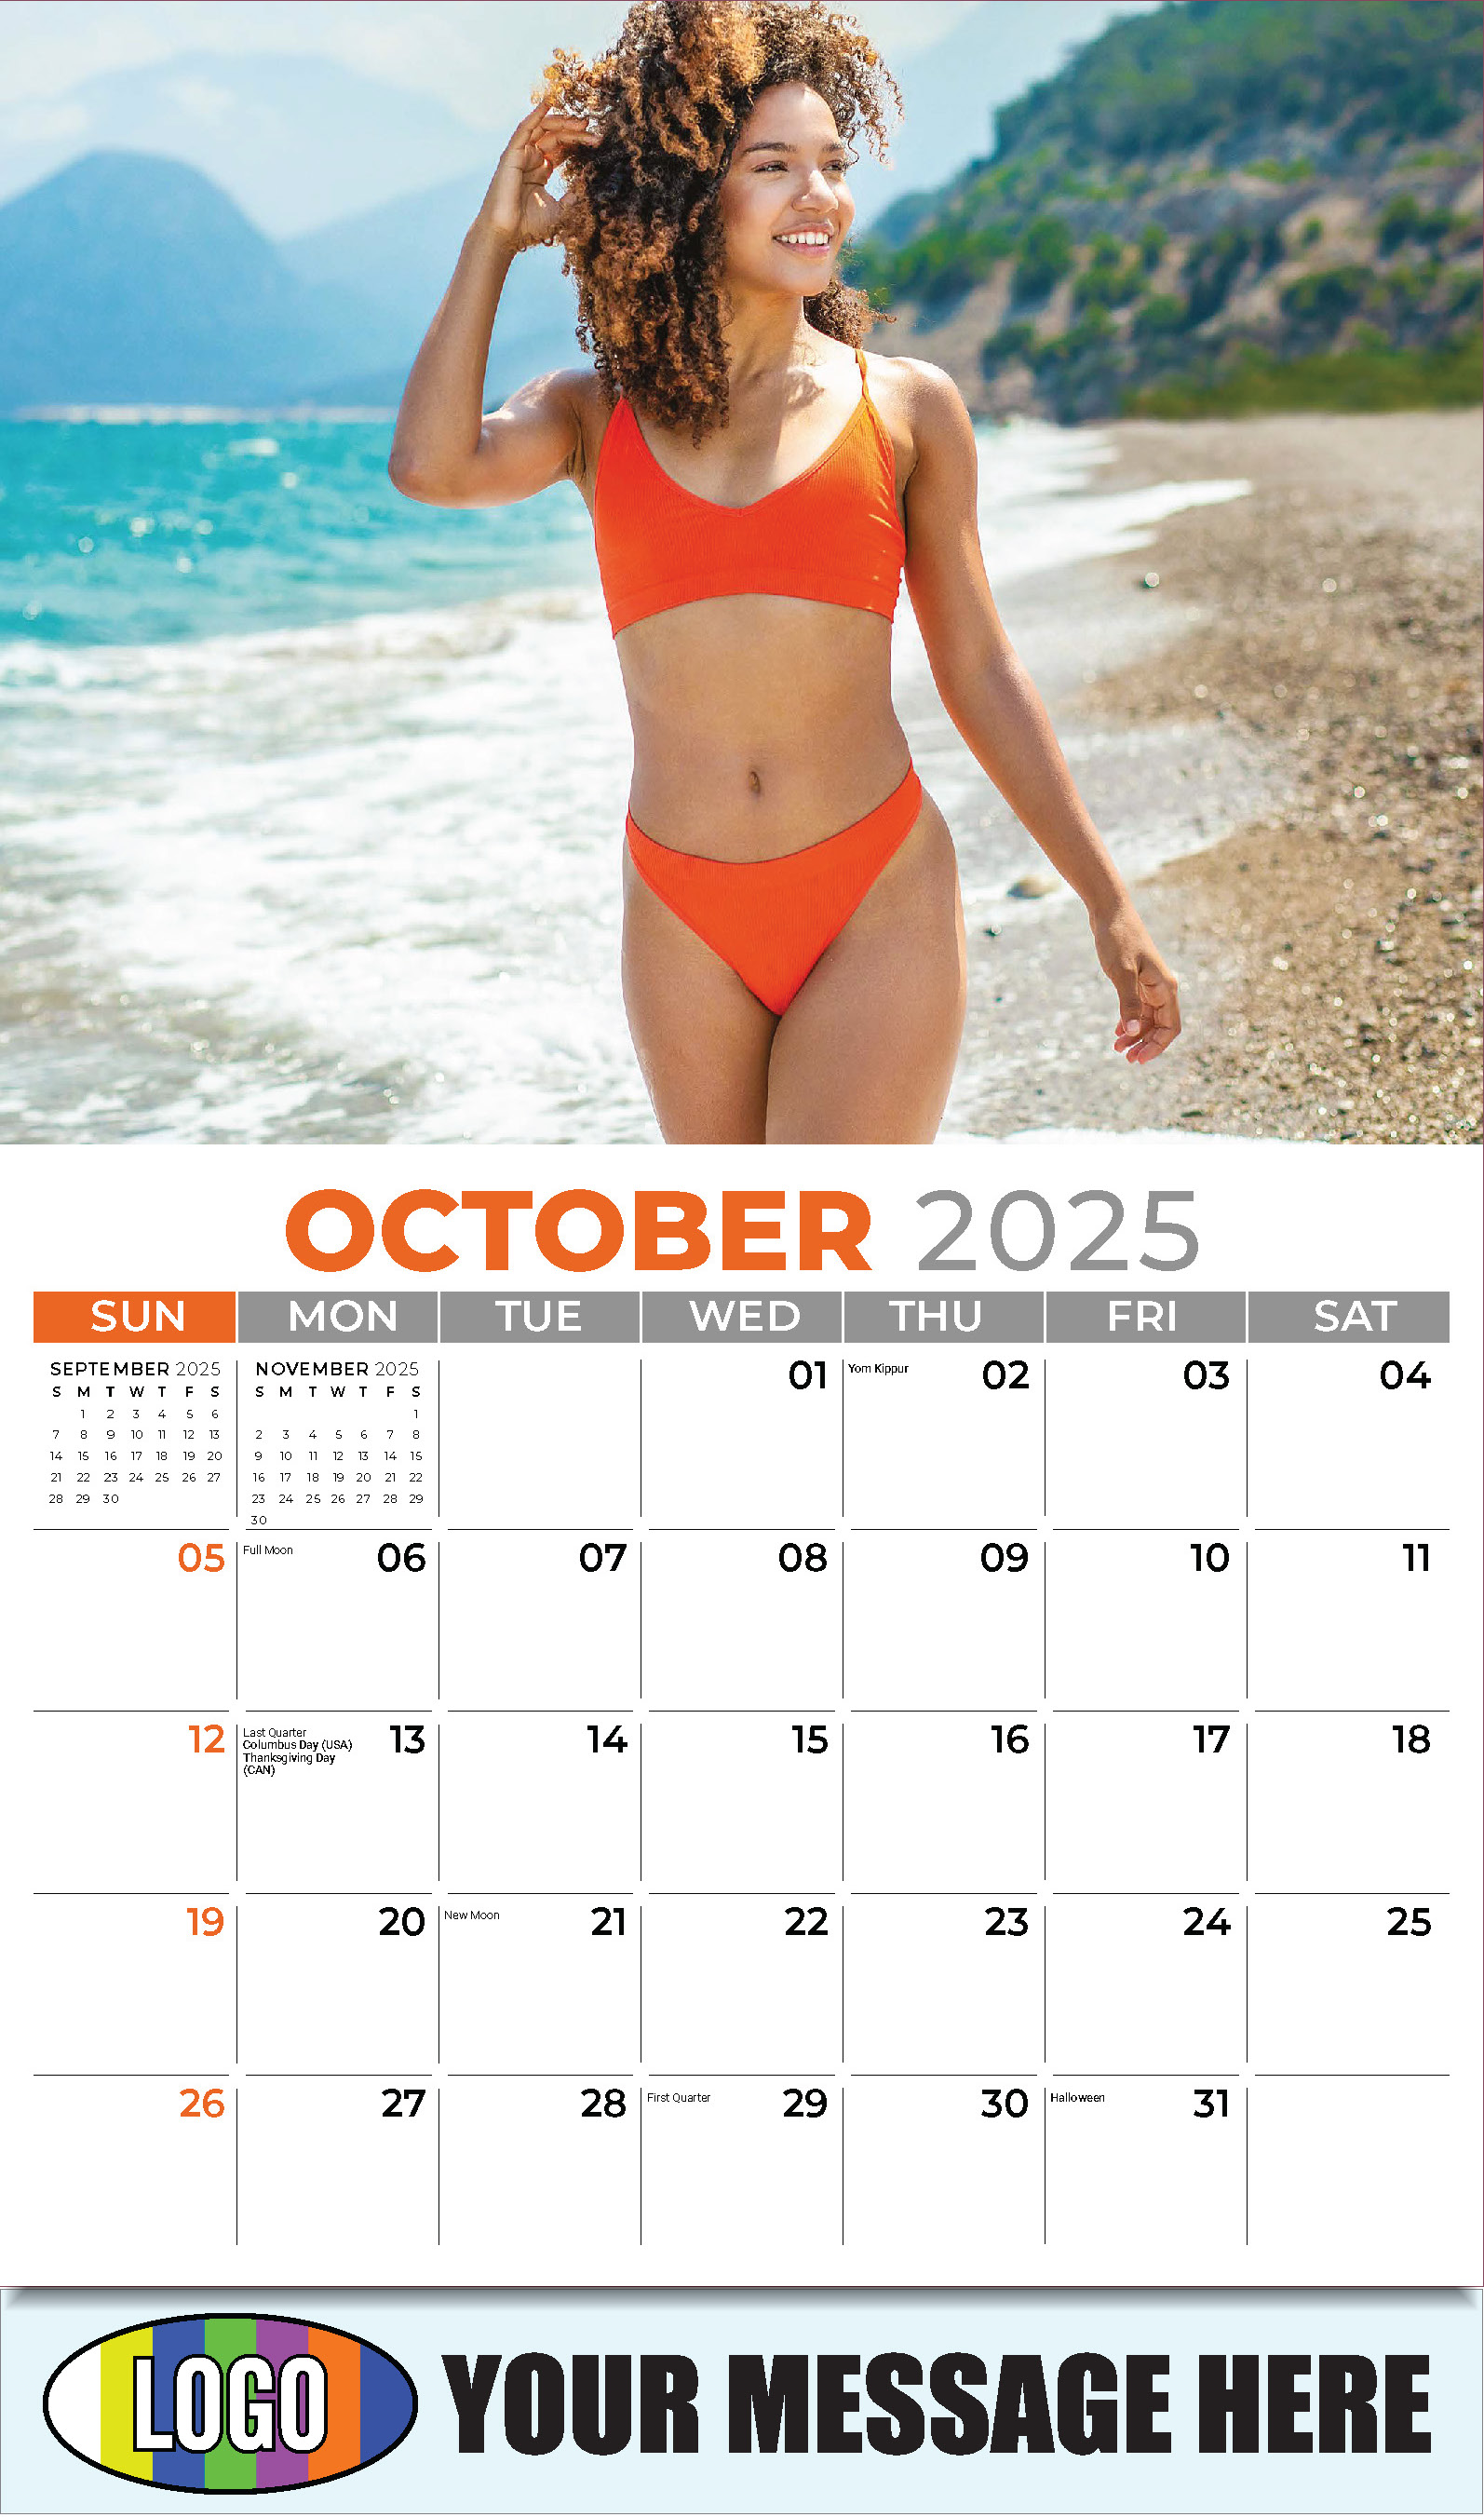 Swimsuits 2025 Business Promotional Wall Calendar - October